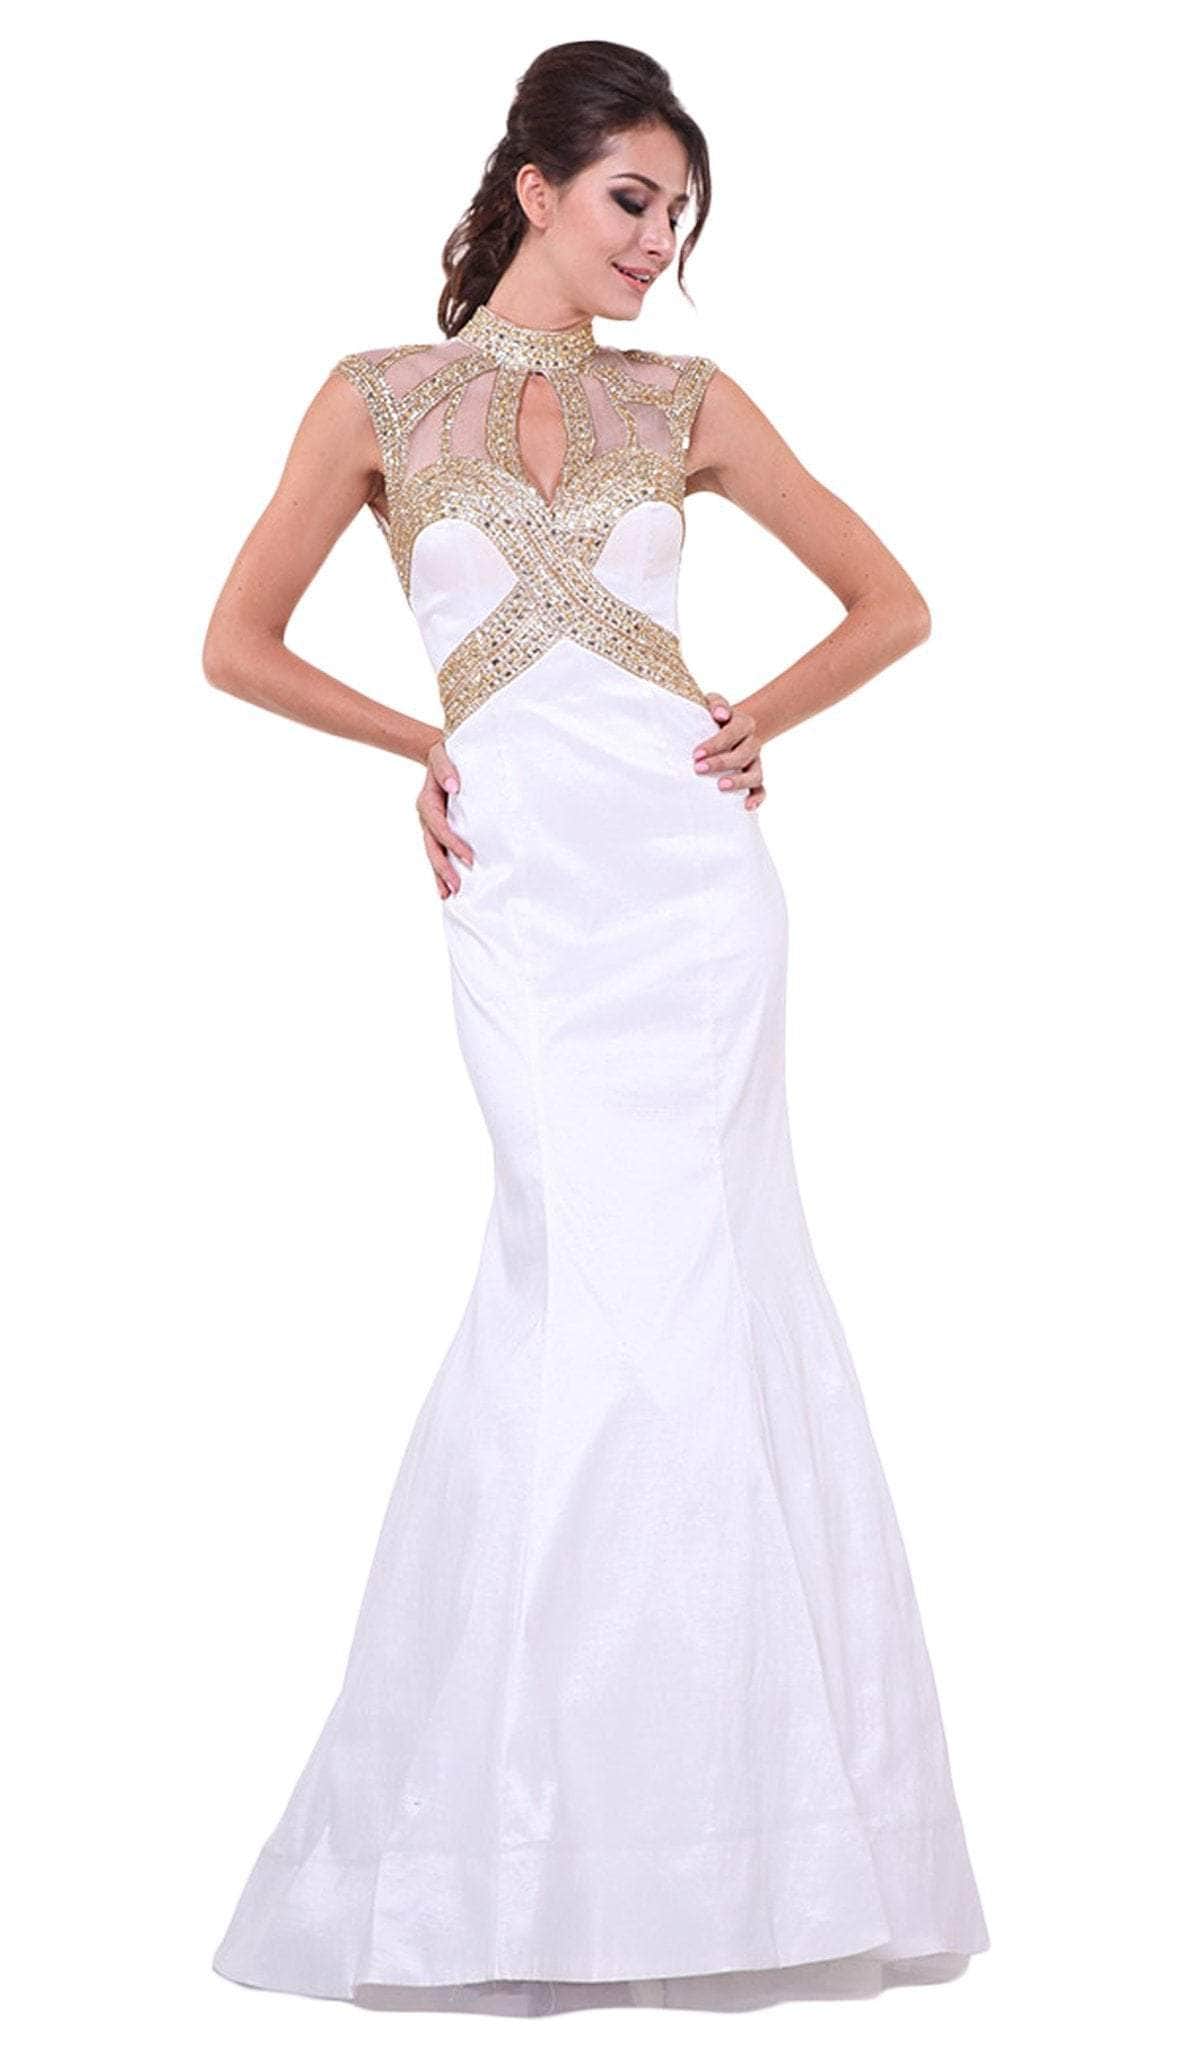 Ladivine 8760 - Adorned Sheer High Neck Fitted Evening Gown
